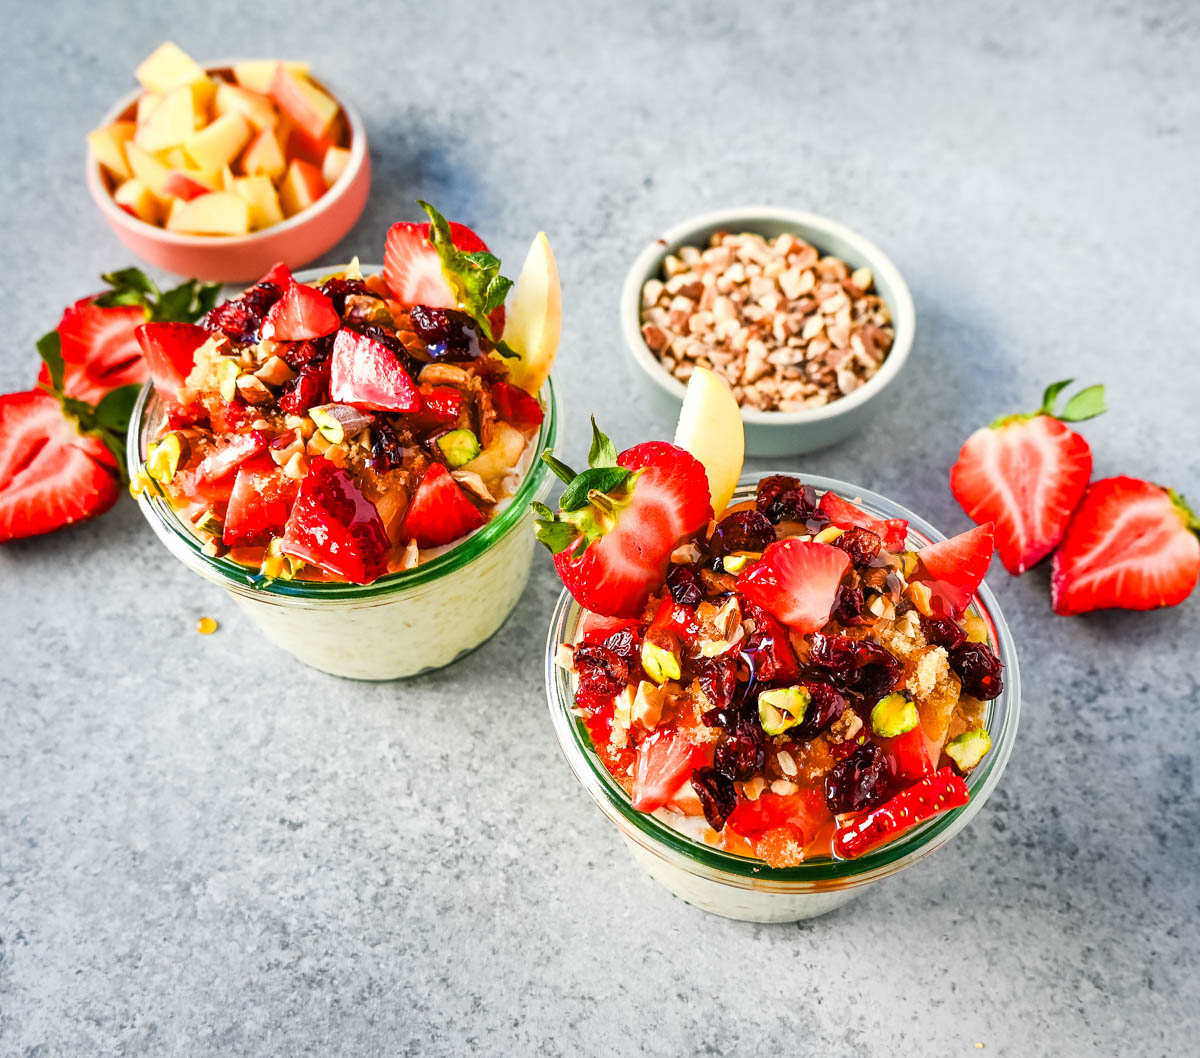 This overnight oats recipe also called Bircher Muesli is made by soaking oats overnight with juice, milk, honey, vanilla, and greek yogurt and then fold in vanilla whipped cream for extra creaminess and topped with fresh fruits, dried fruits, and nuts. It is the perfect and delicious easy, grab-and-go breakfast.